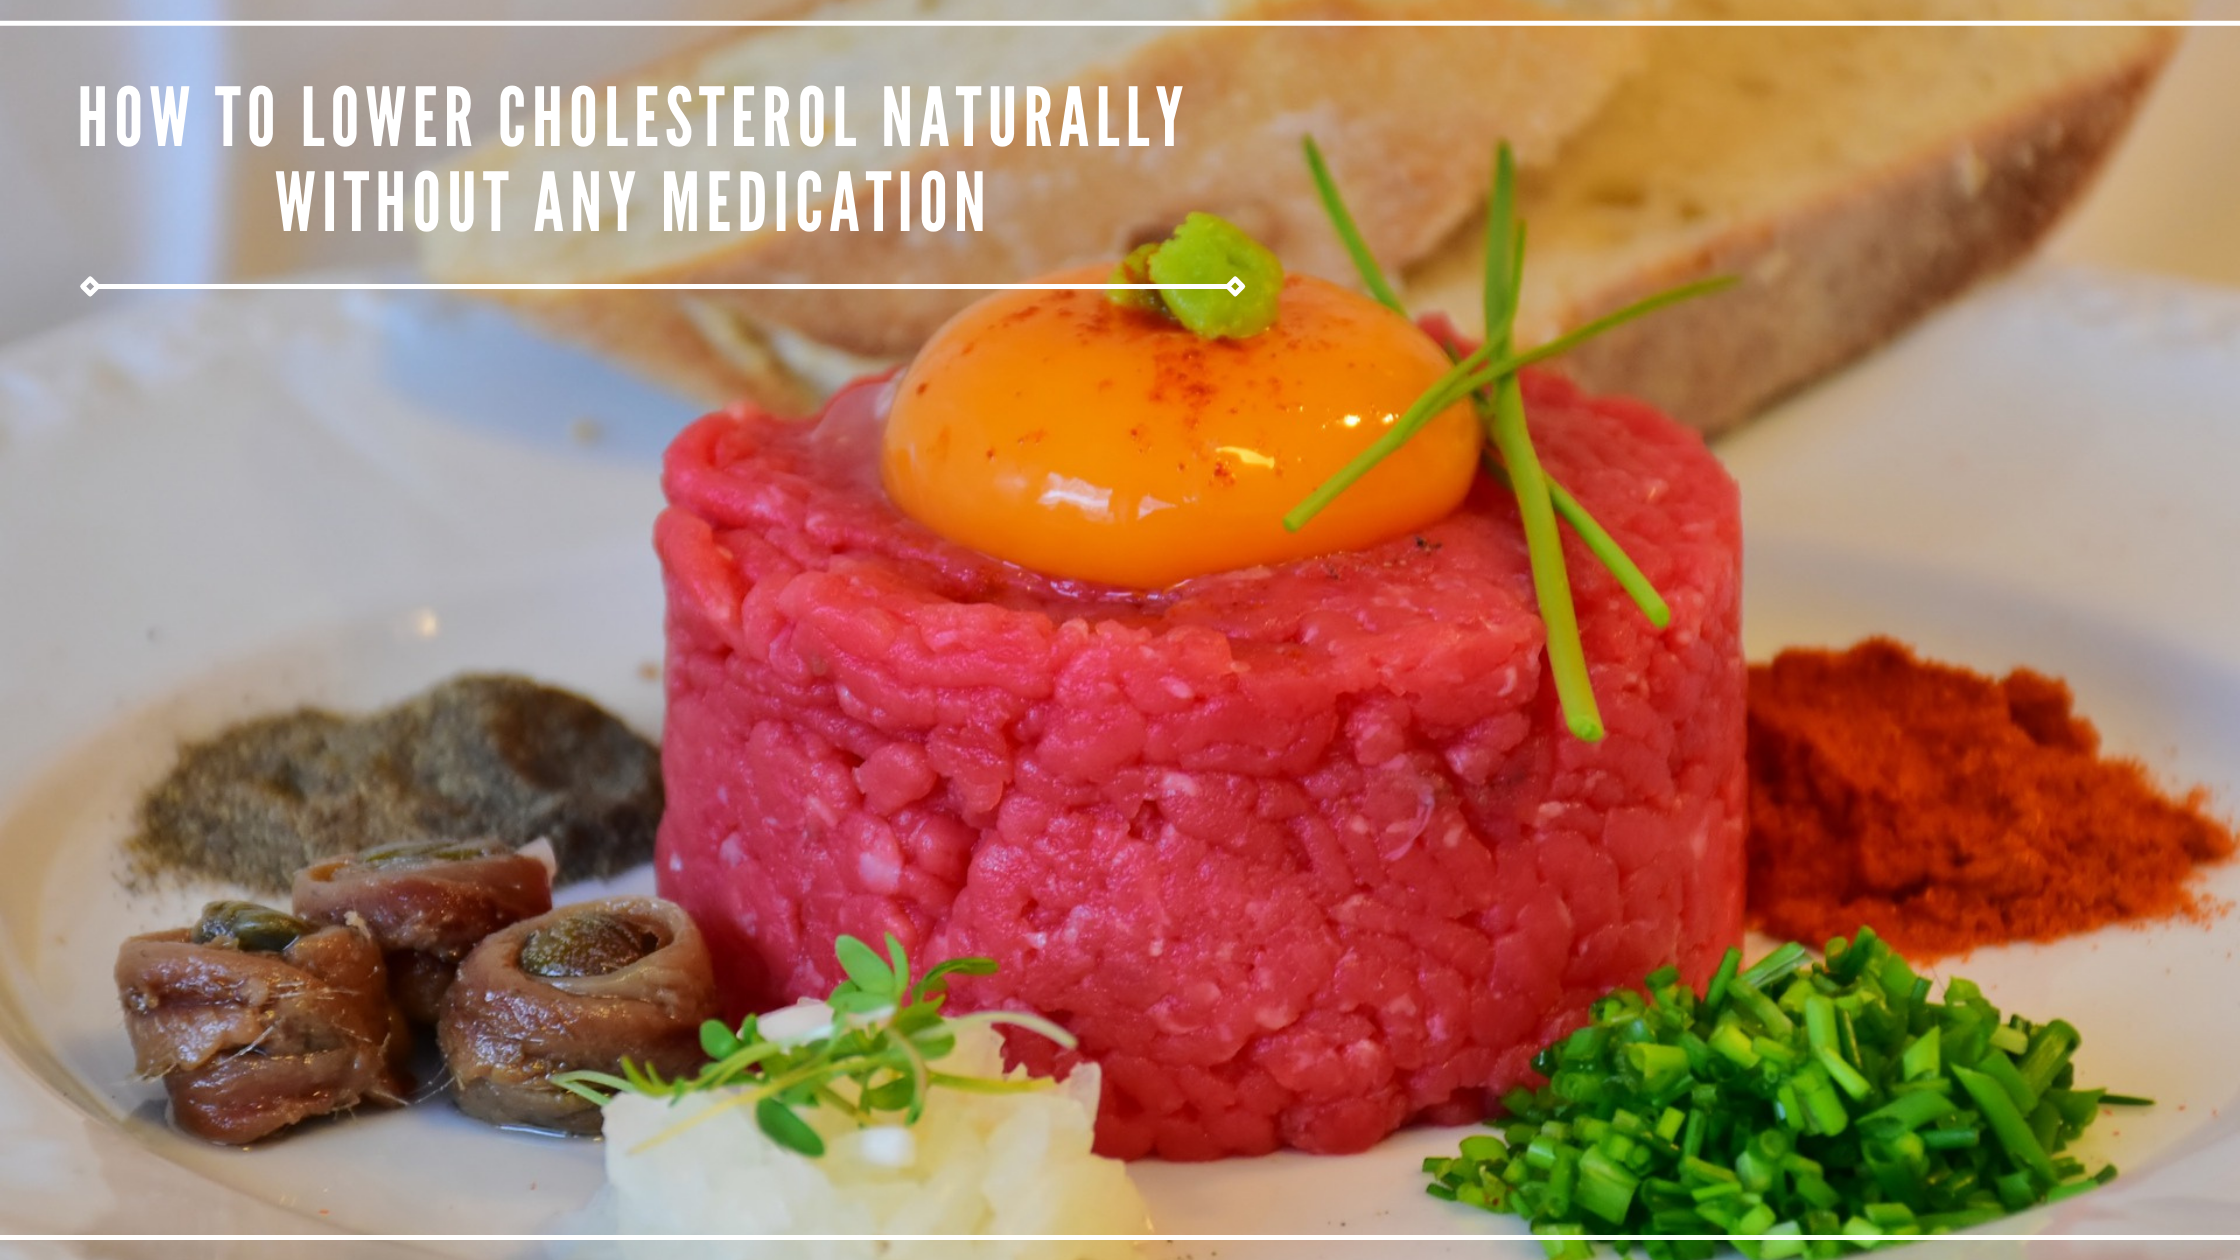 How to lower cholesterol naturally without any medication